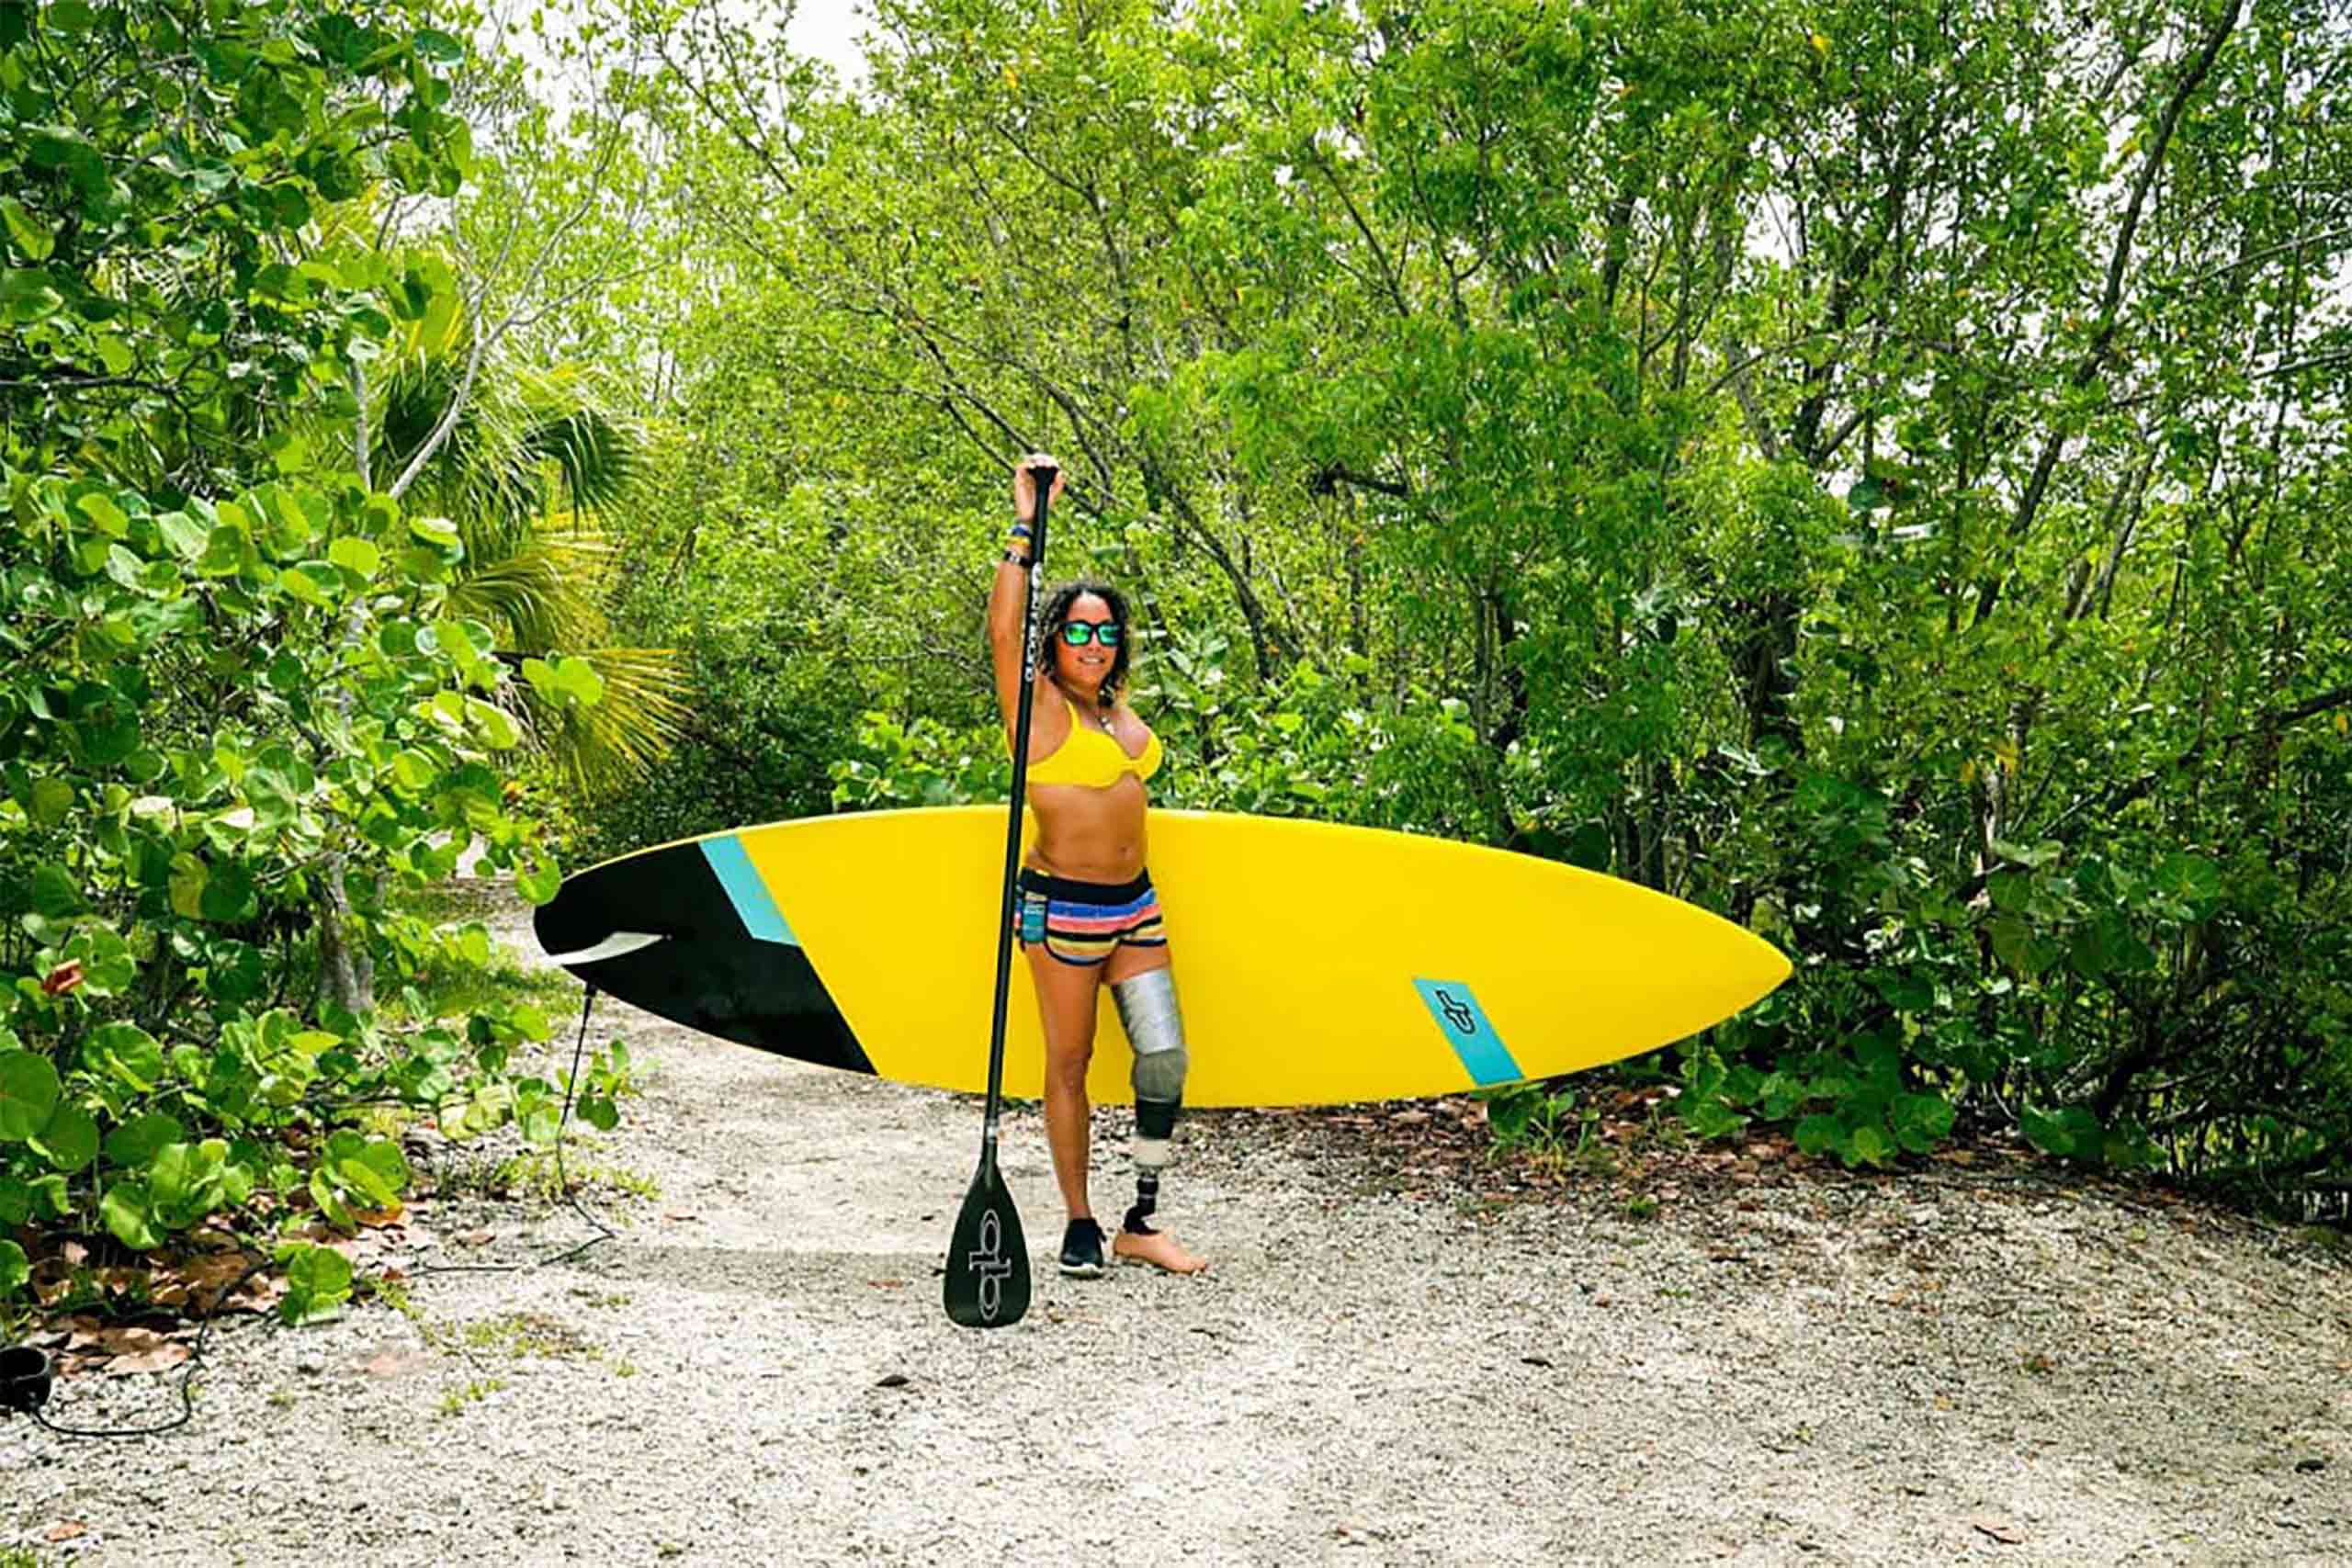 Paddle-boarder with a prosthetic leg in Florida, USA. Ocean travel offers accessible experiences and assistance to disabled travellers.